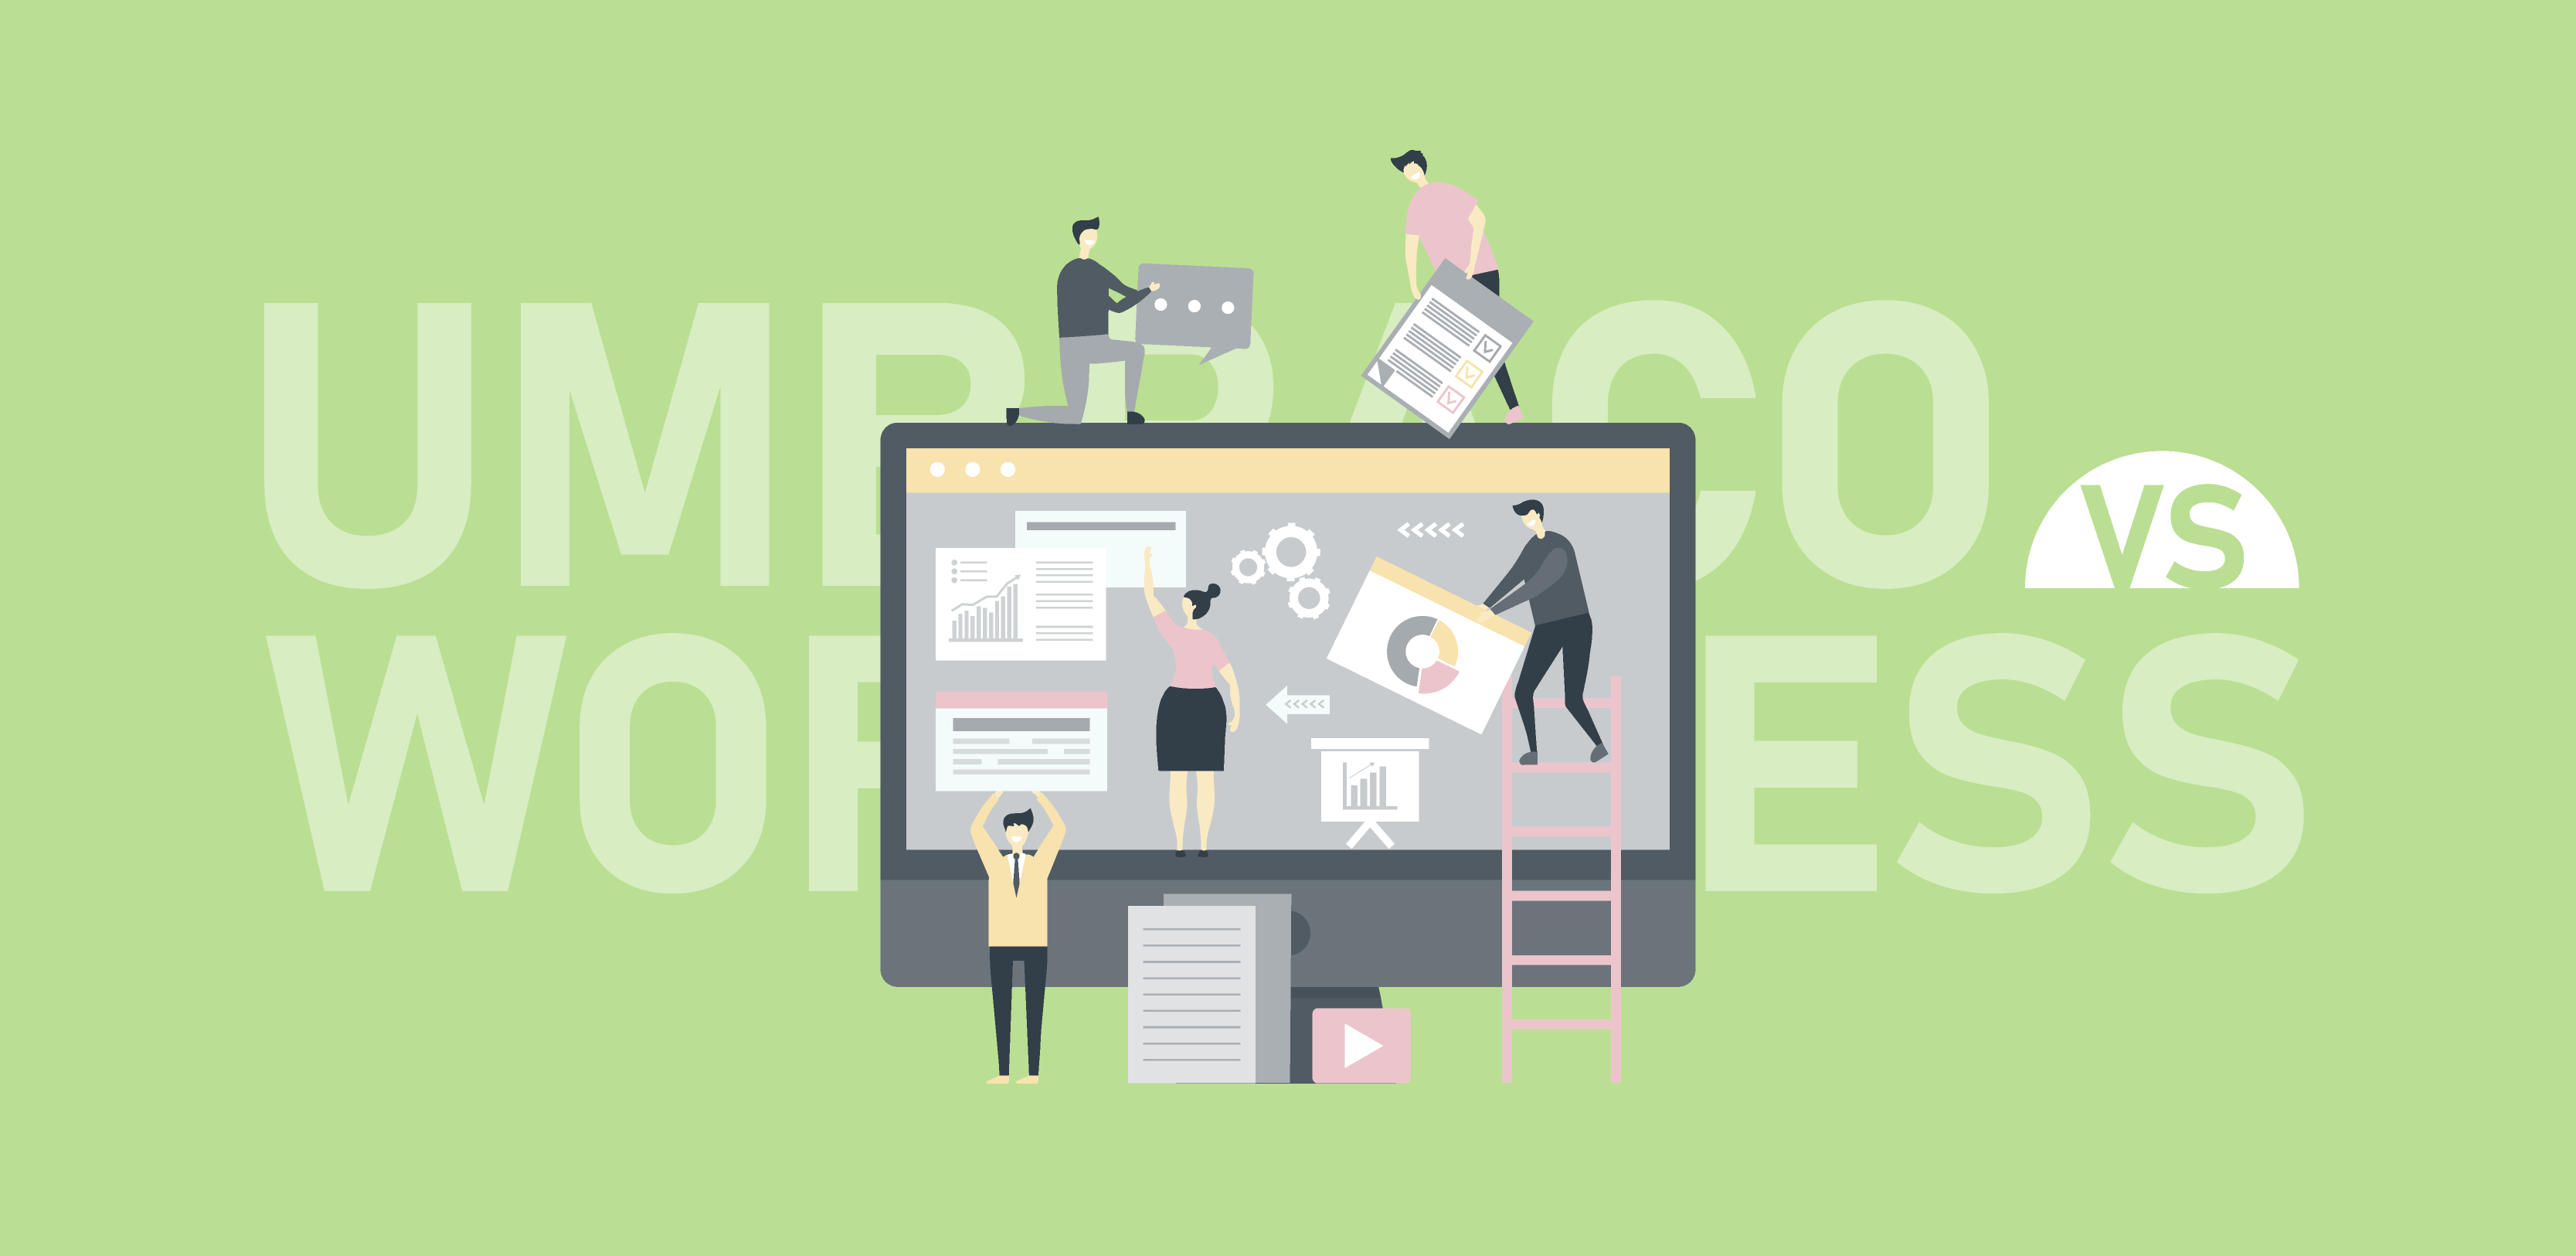 Umbraco Vs WordPress: Which CMS Should You Use in 2020 